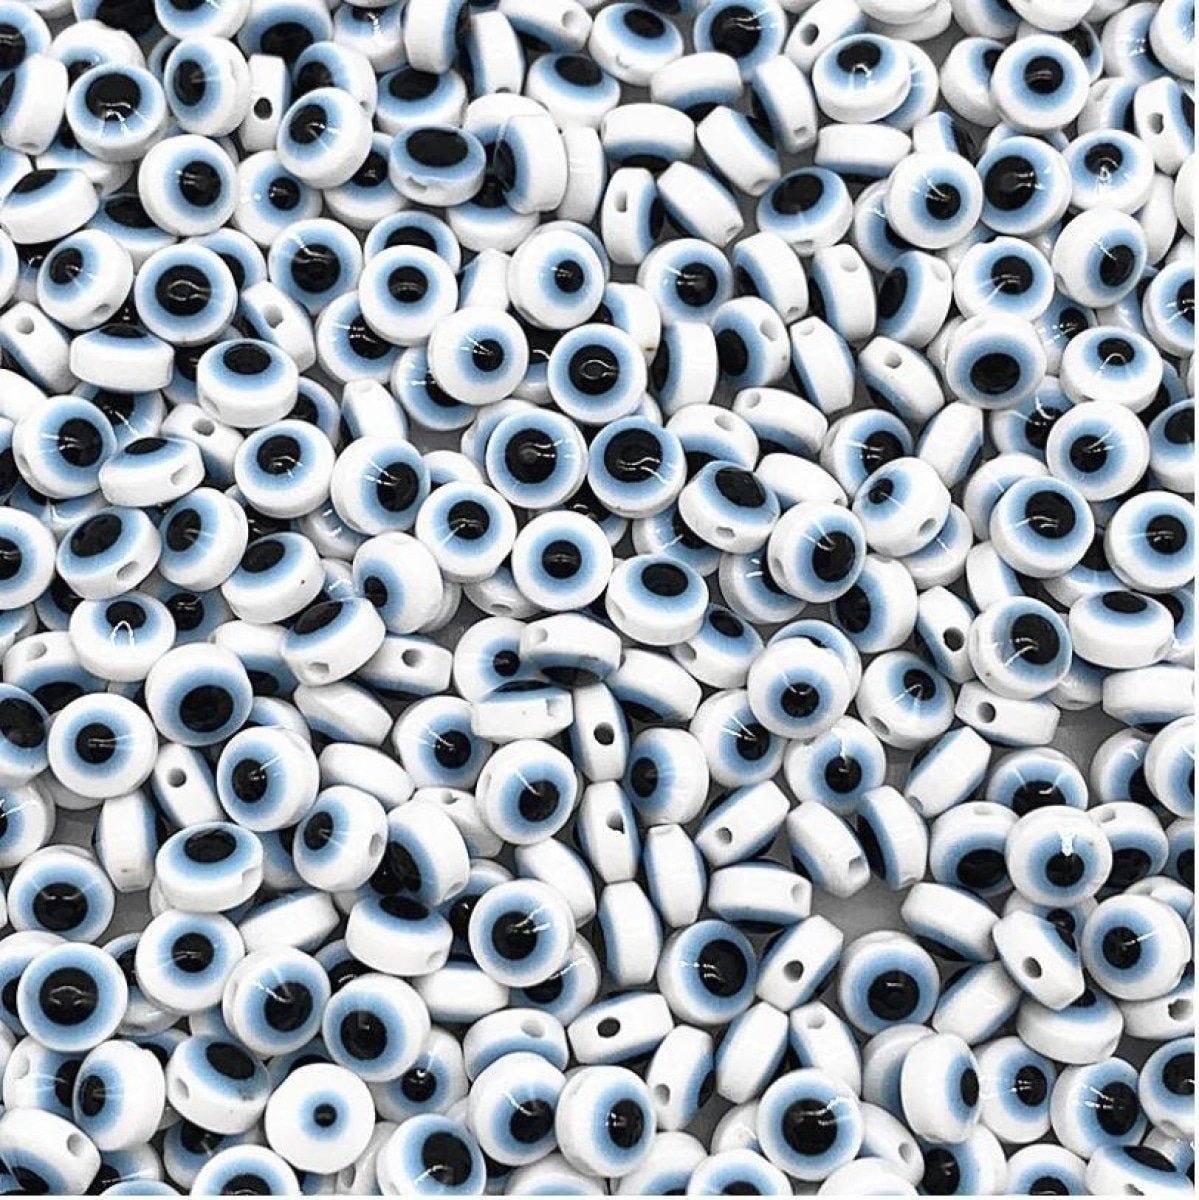 48pcs 8/10mm Resin Spacer Beads Double Sided Eyes for Jewelry Making DIY Bracelet Beads Flat Backing - White & Blue 8mm - - Asia Sell